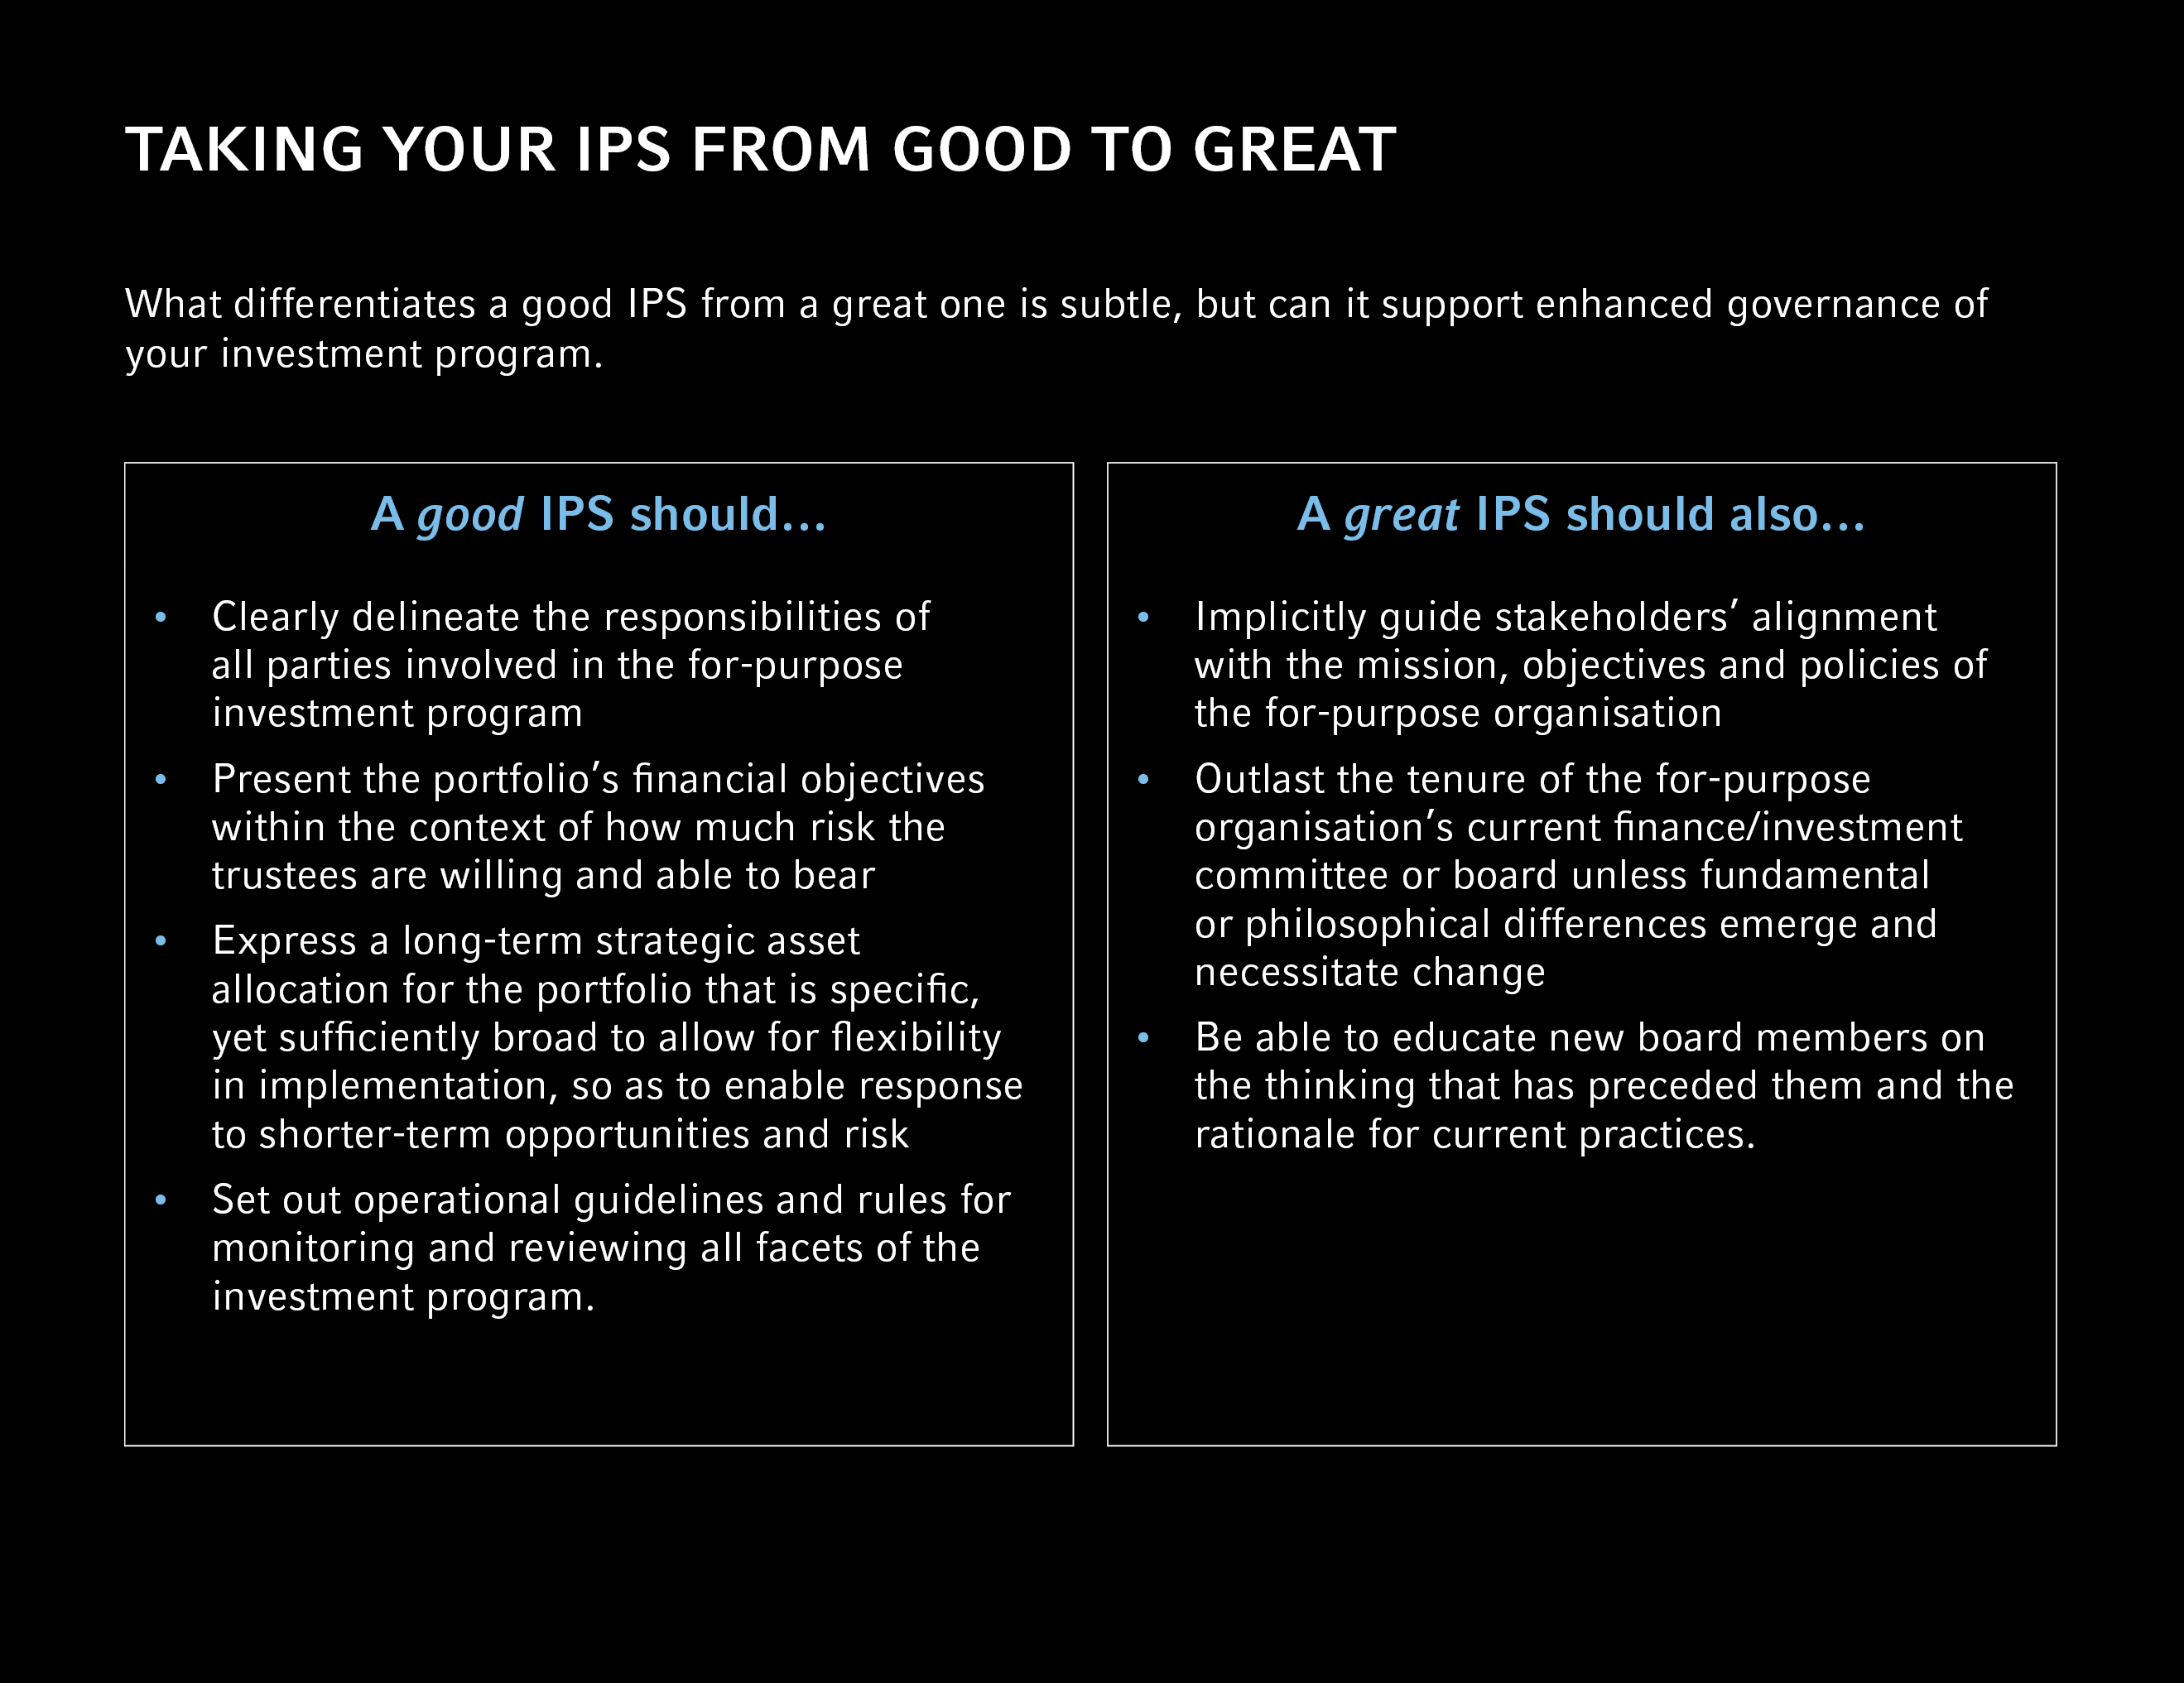 Taking your IPS from good to great